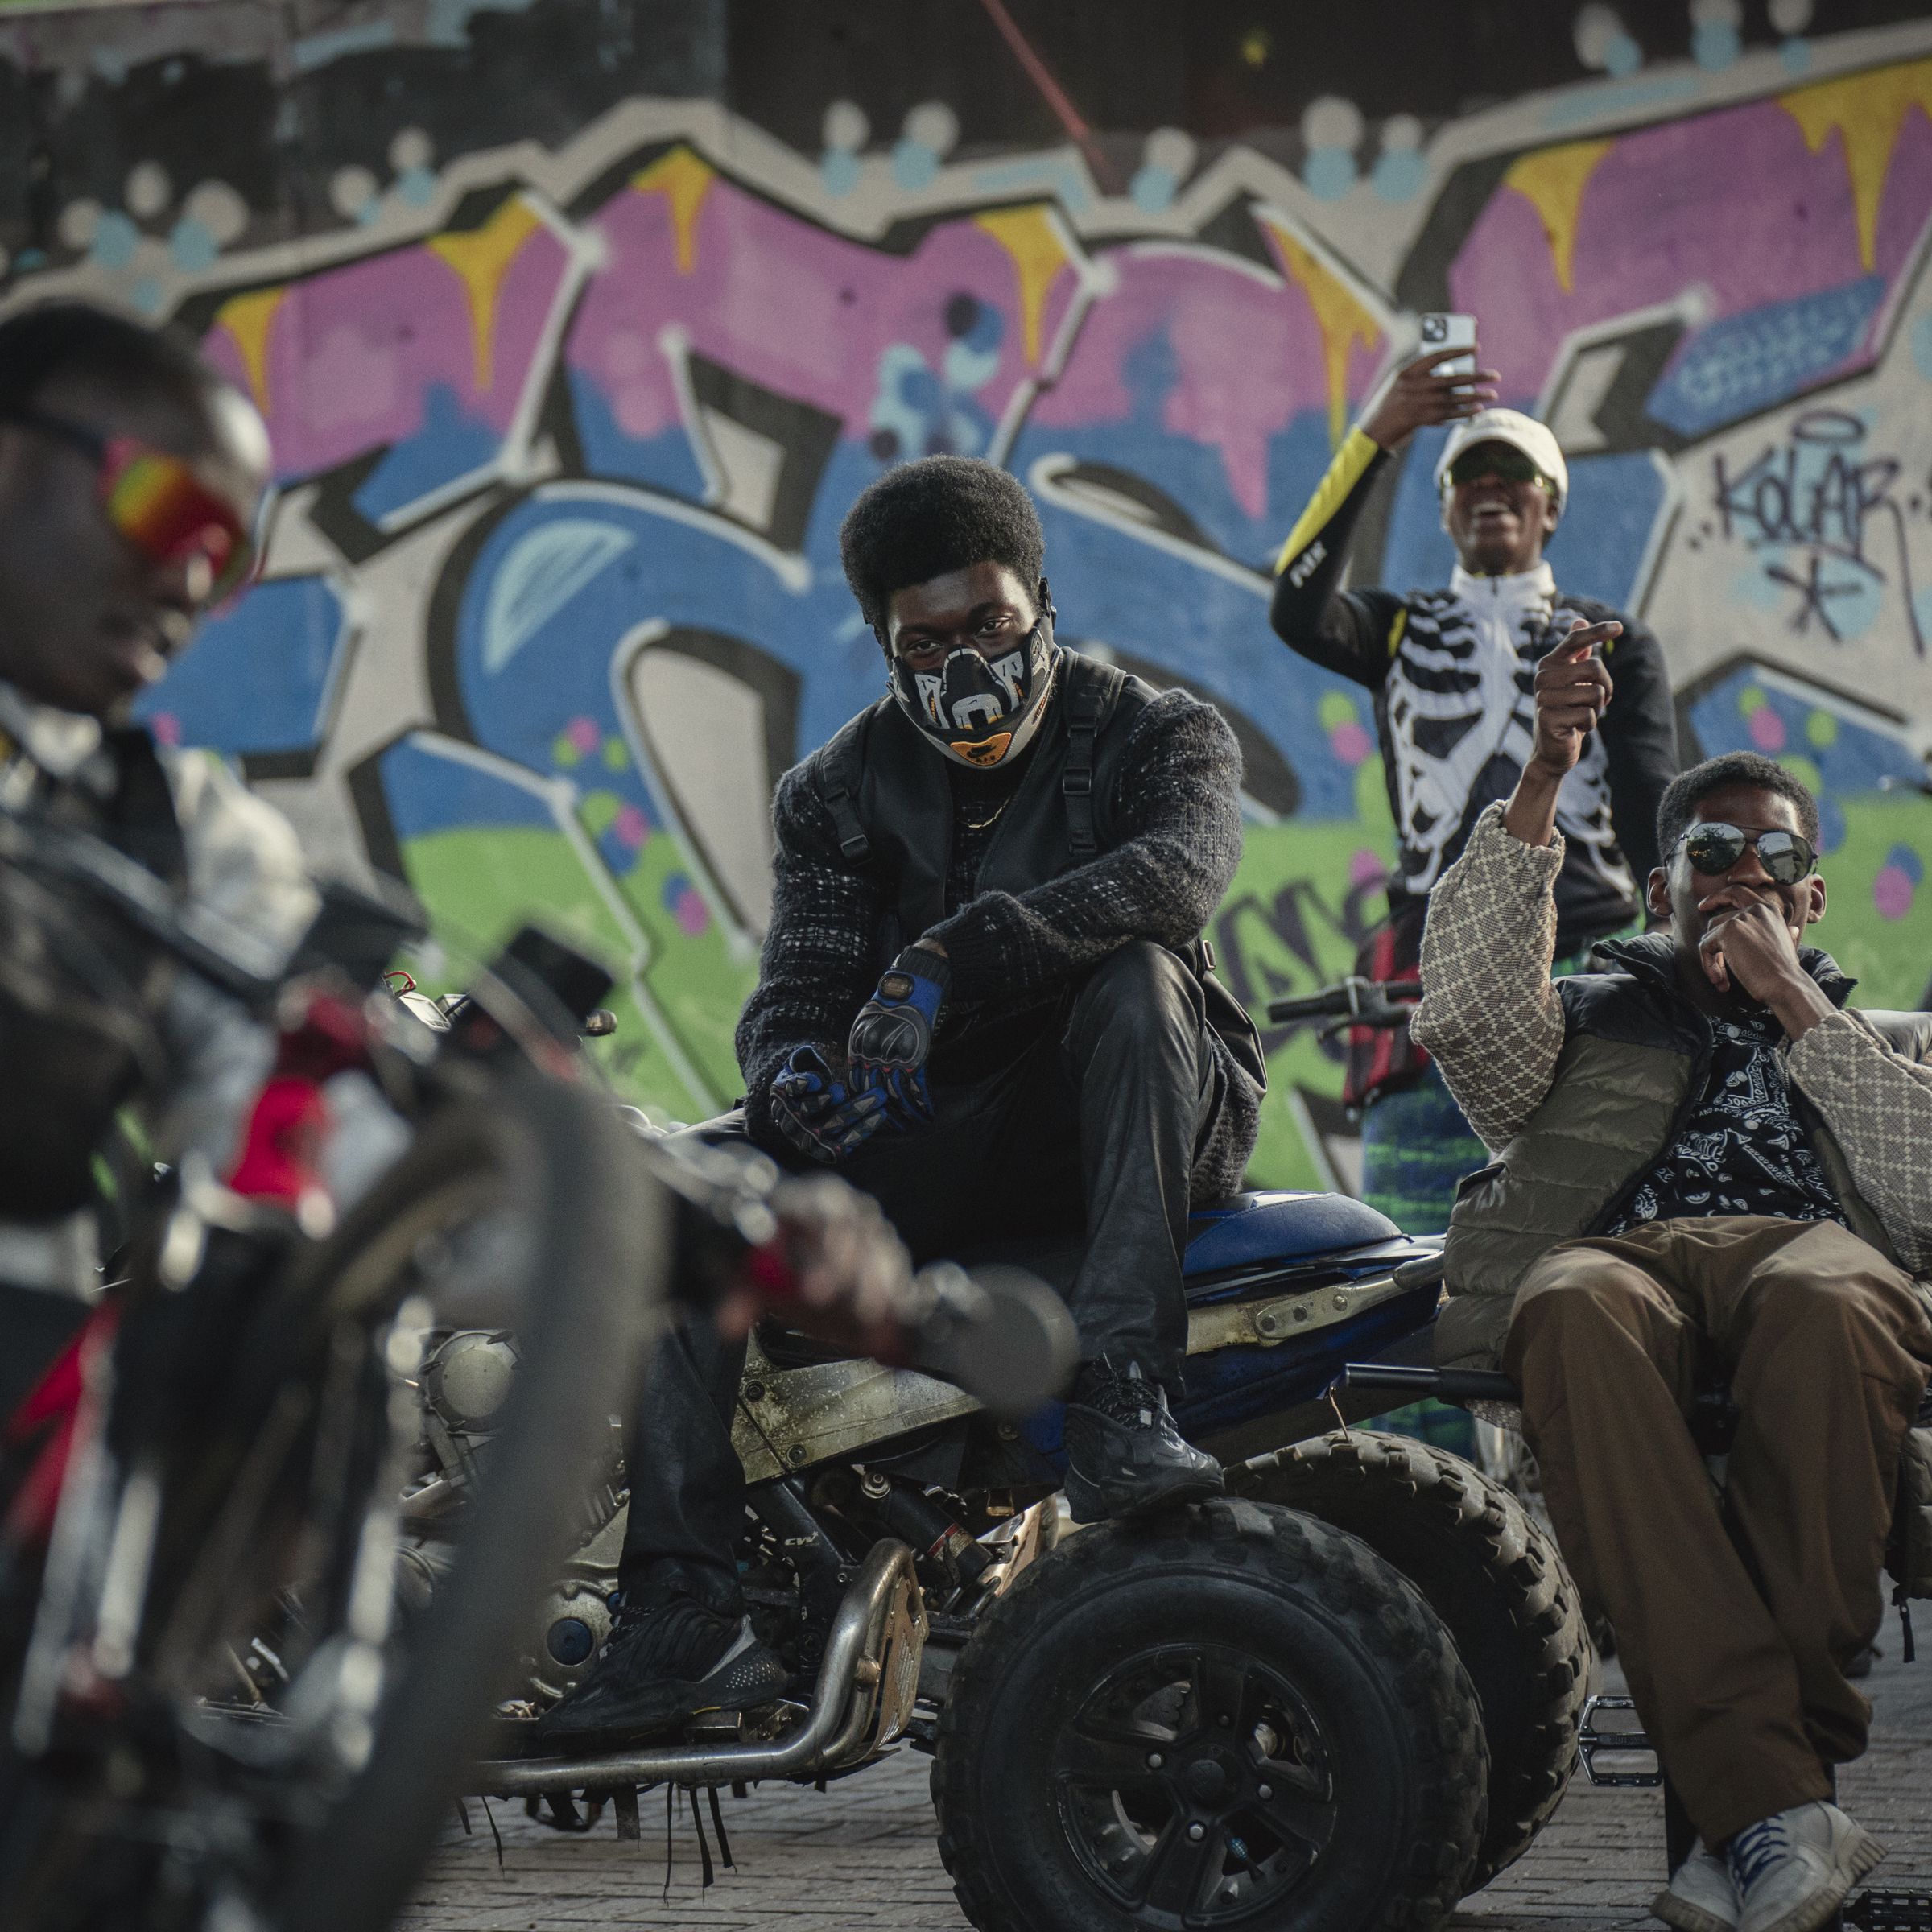 A man wearing a motorcycle mask, black jackets, pants, and boots sitting on top of an ATV. Around the man is an assortment of other people sitting on motorized bikes and motorcycles doing tricks, and behind the group is a massive wall covered in street art.